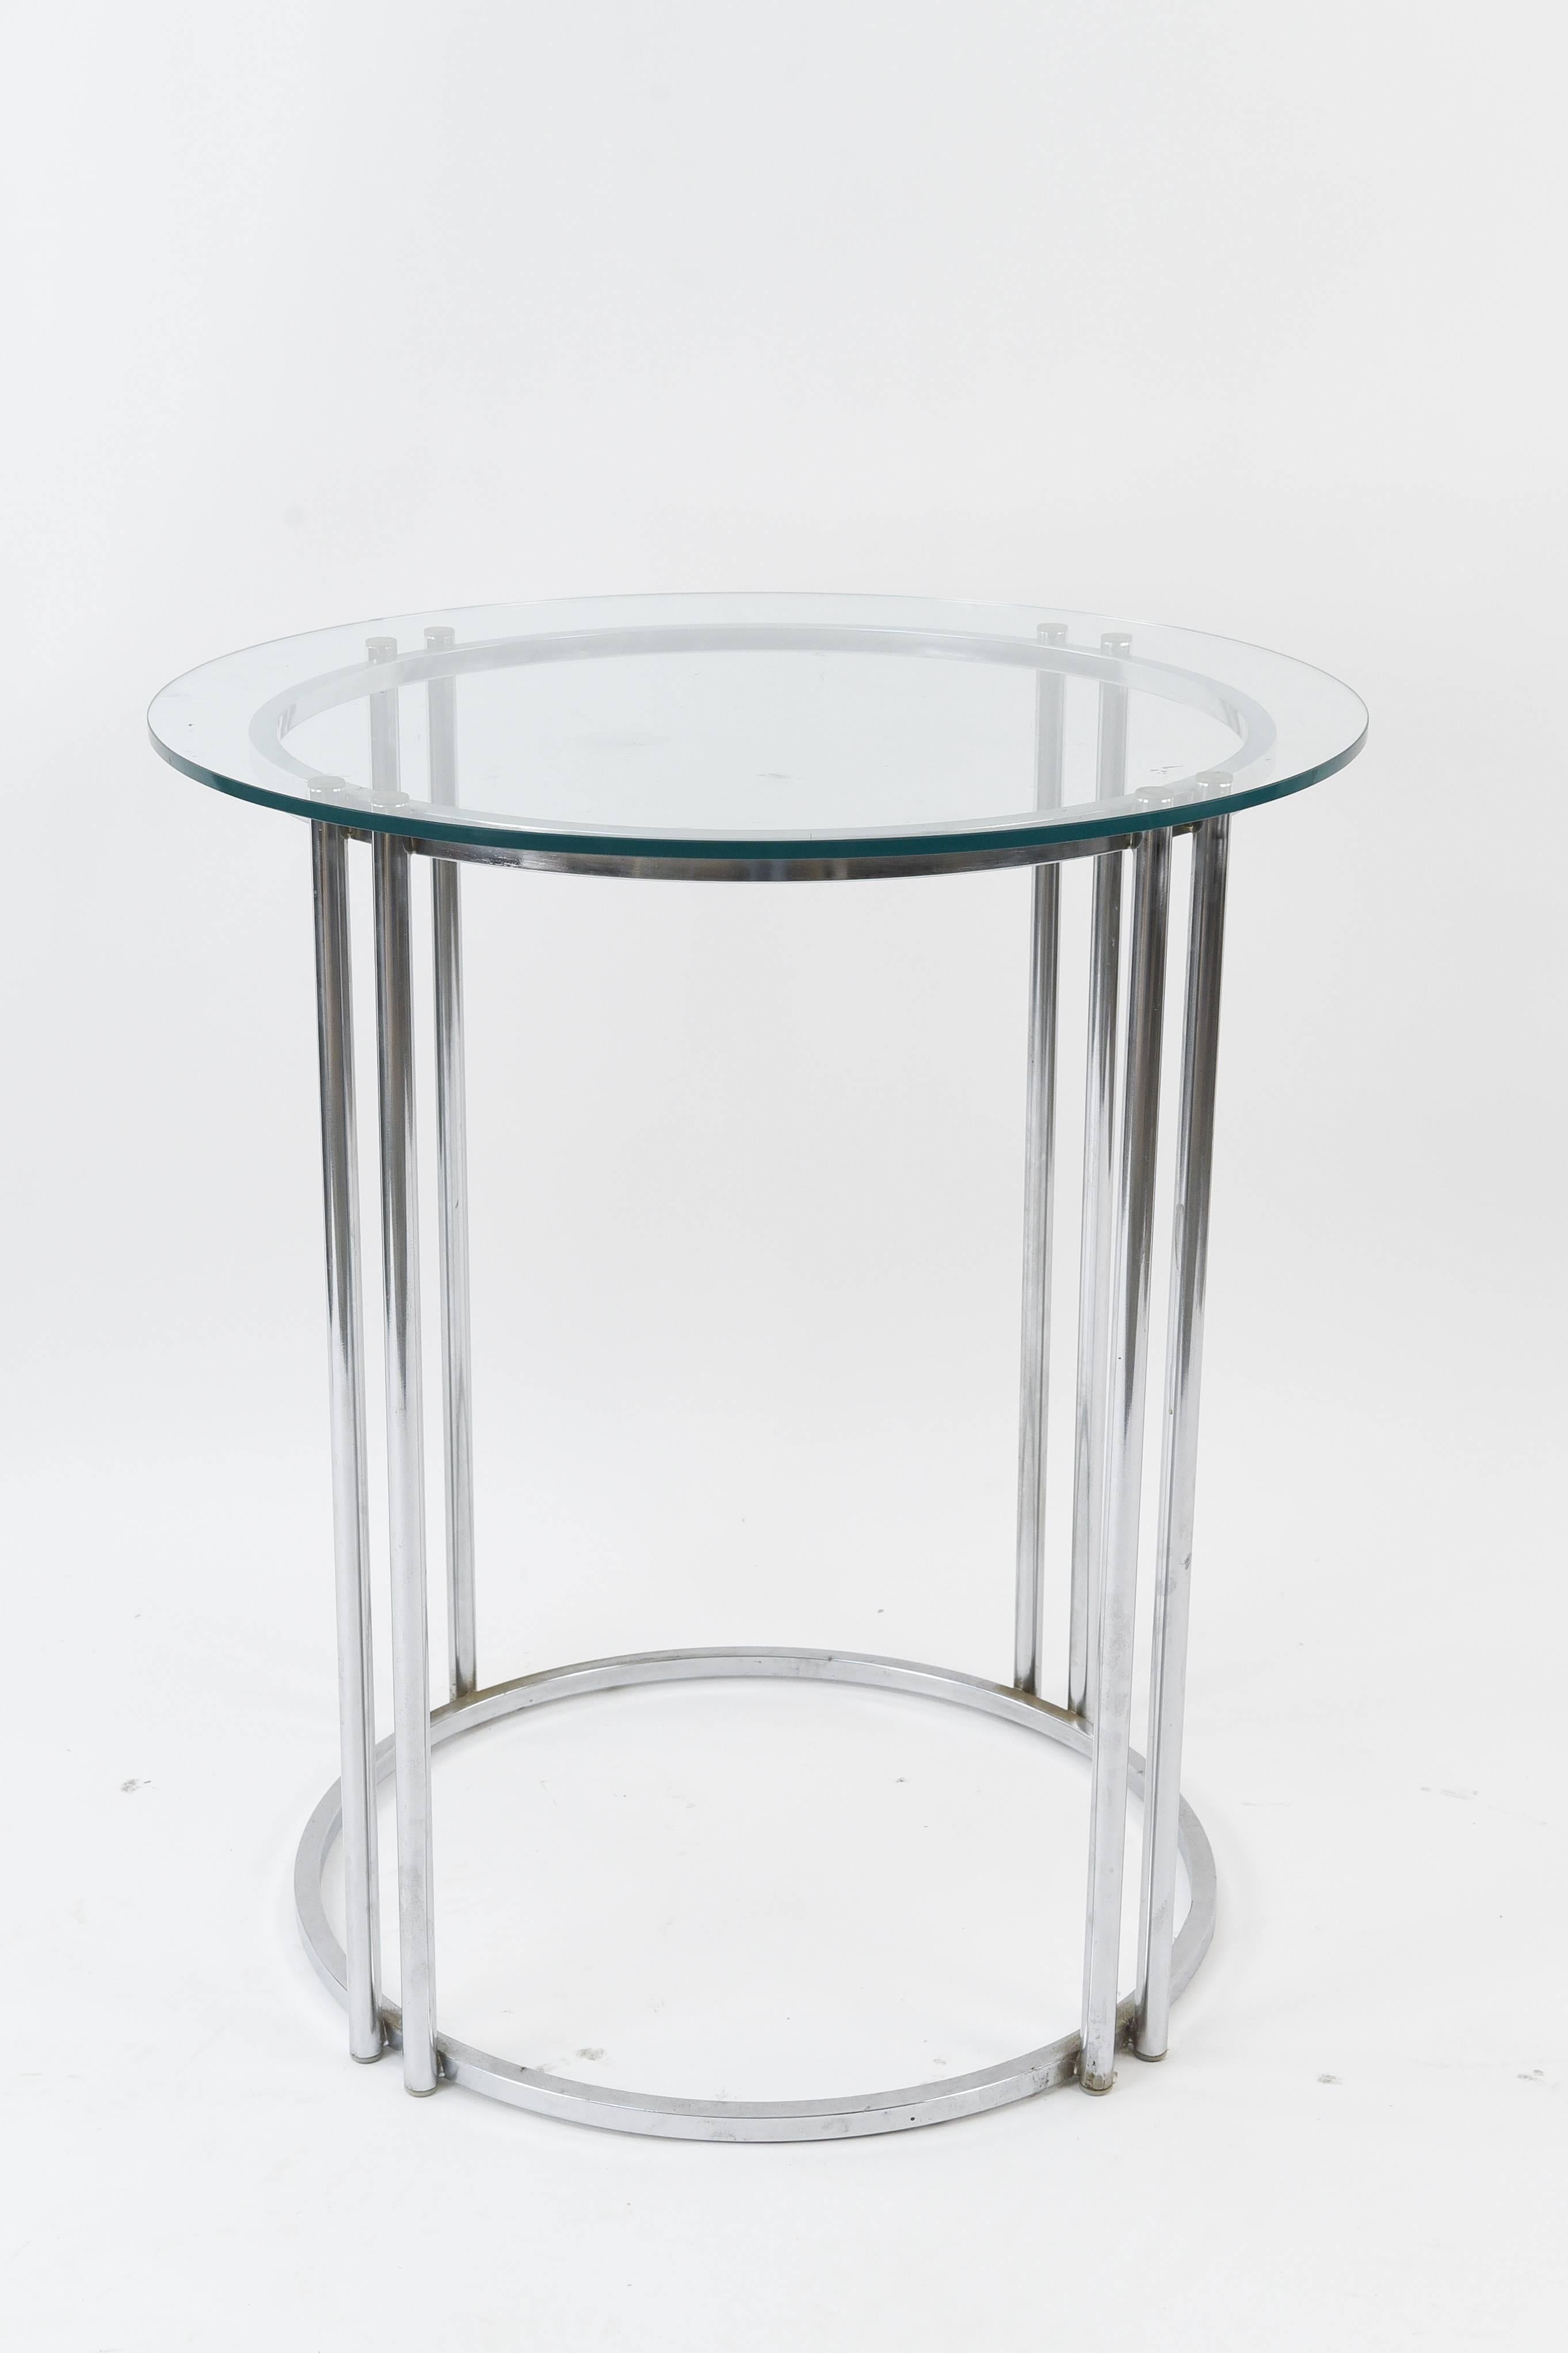 a great medium sized round display stand table or small cocktail table. 